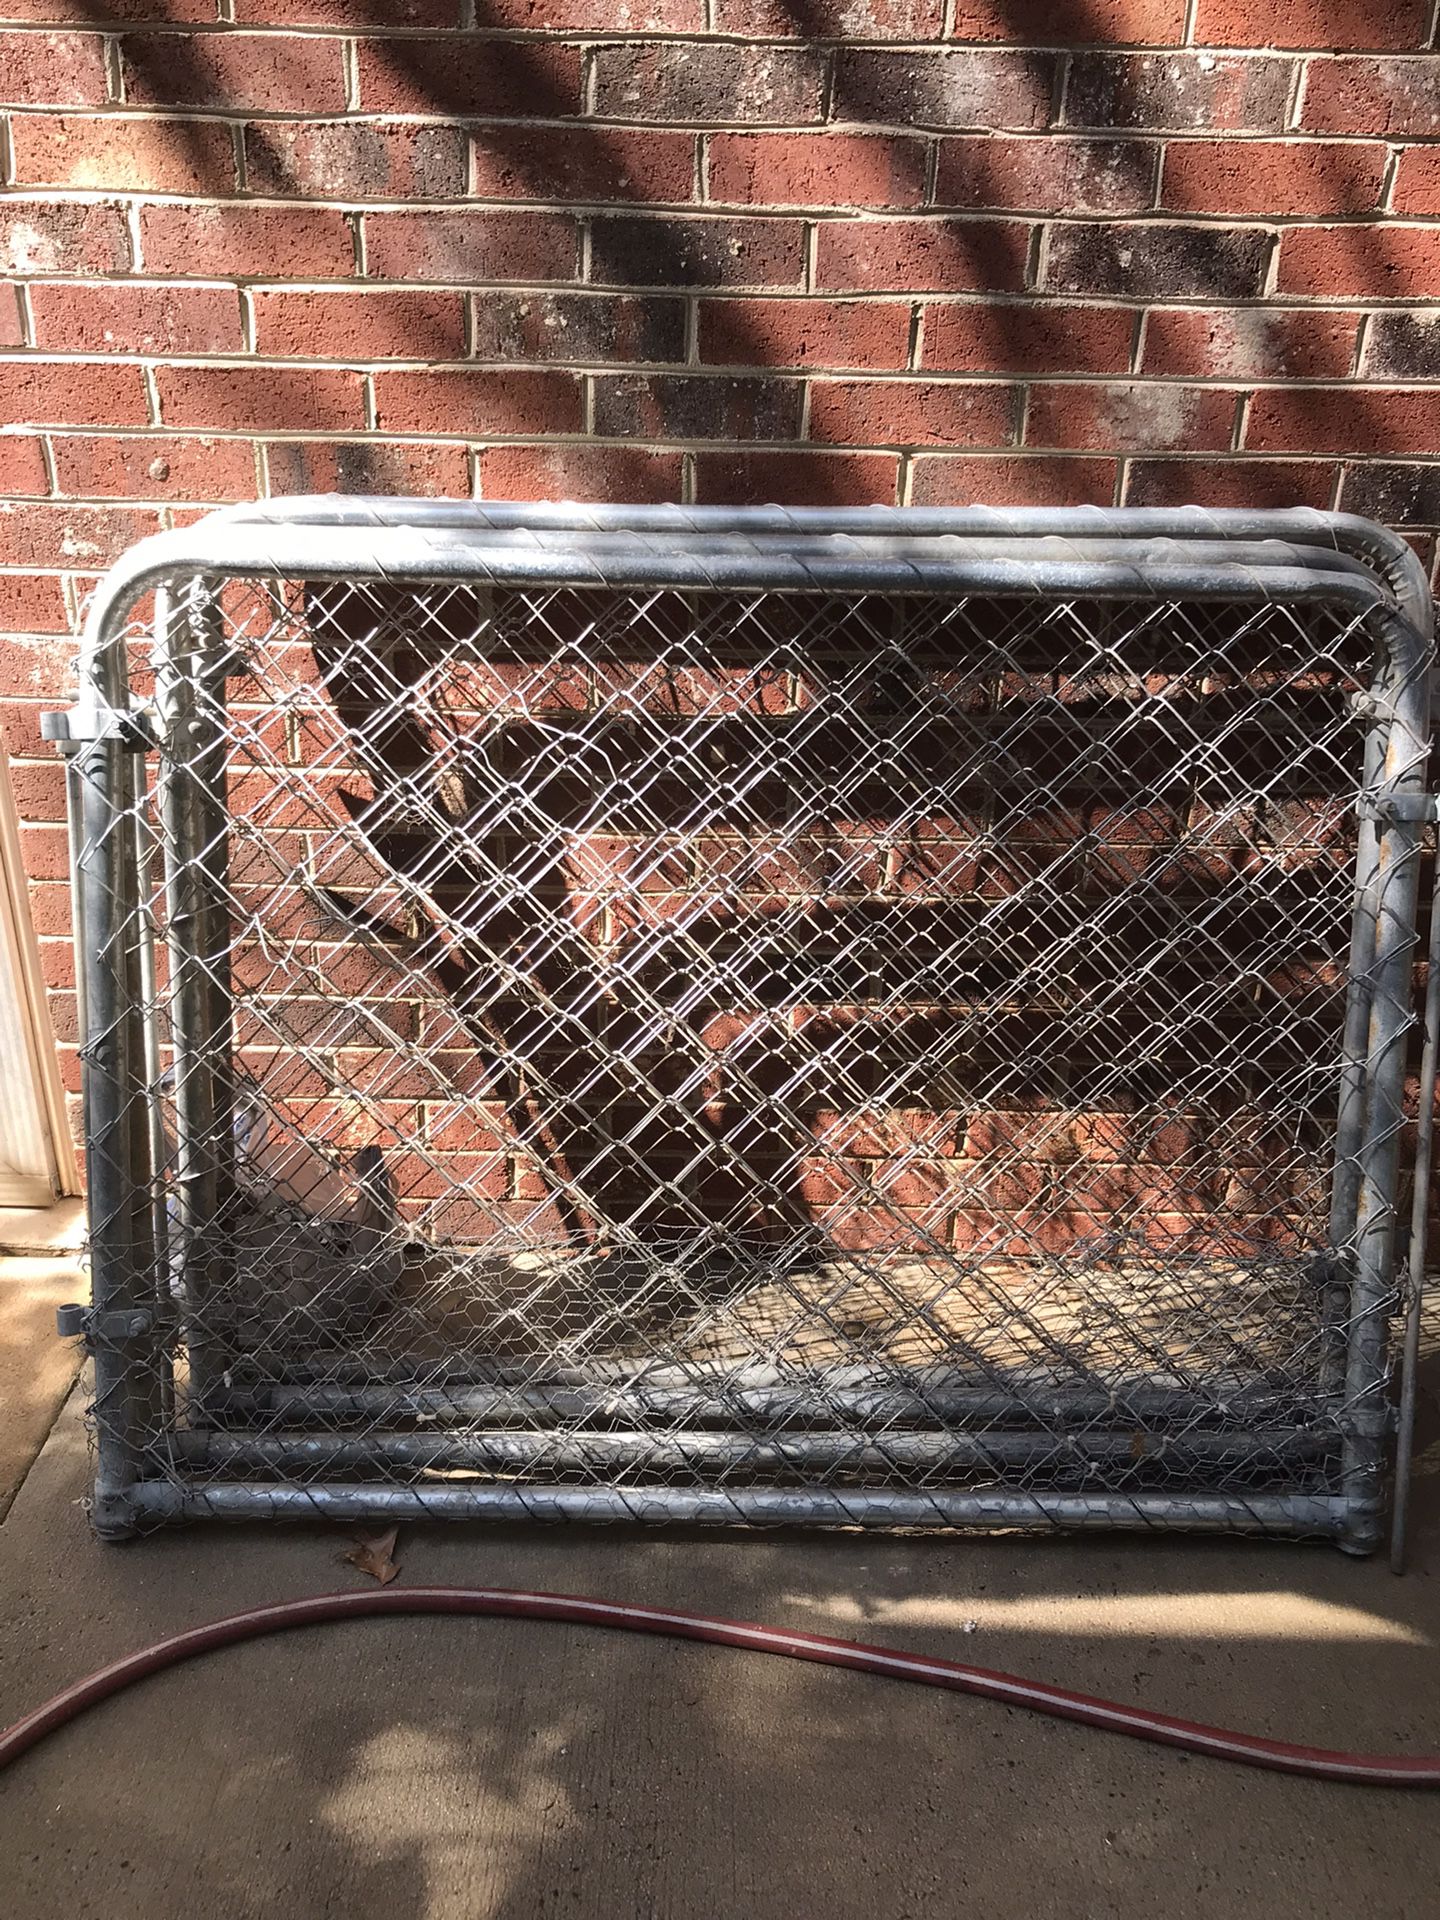 4x4x3 Puppy Or Small Dog Kennel/exercise Pen